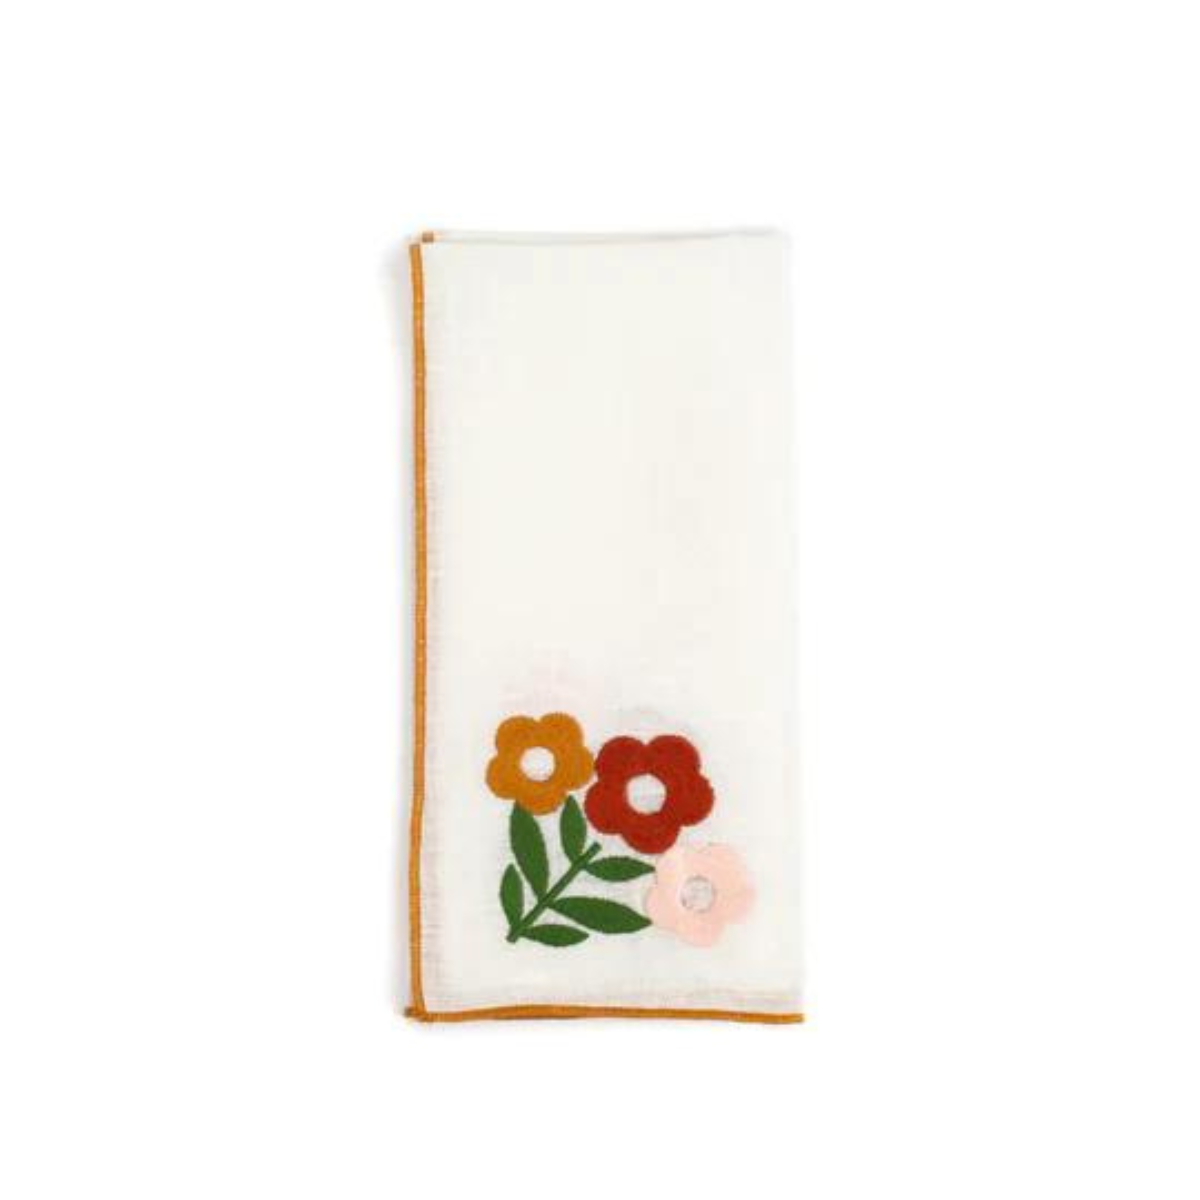 Misette Colorblock Embroidered Napkins in Amber (Set of 4)